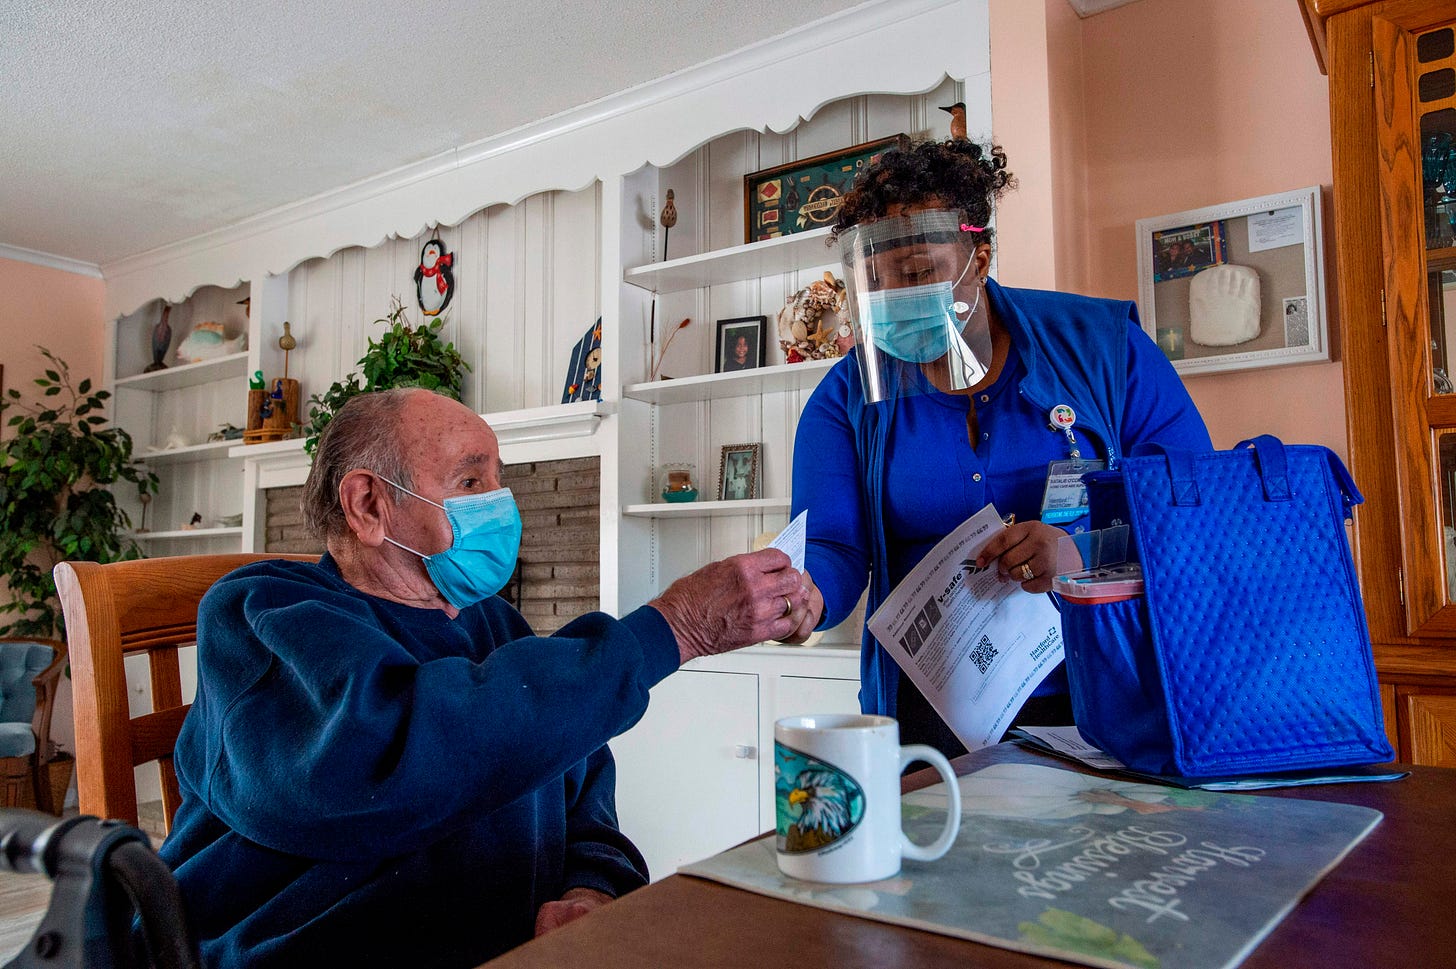 R.N Natalie O'Connor hands a vaccine card to Stanley Mowel (L) before vaccinating him at his home in Manchester, Connecticut on February 12, 2021